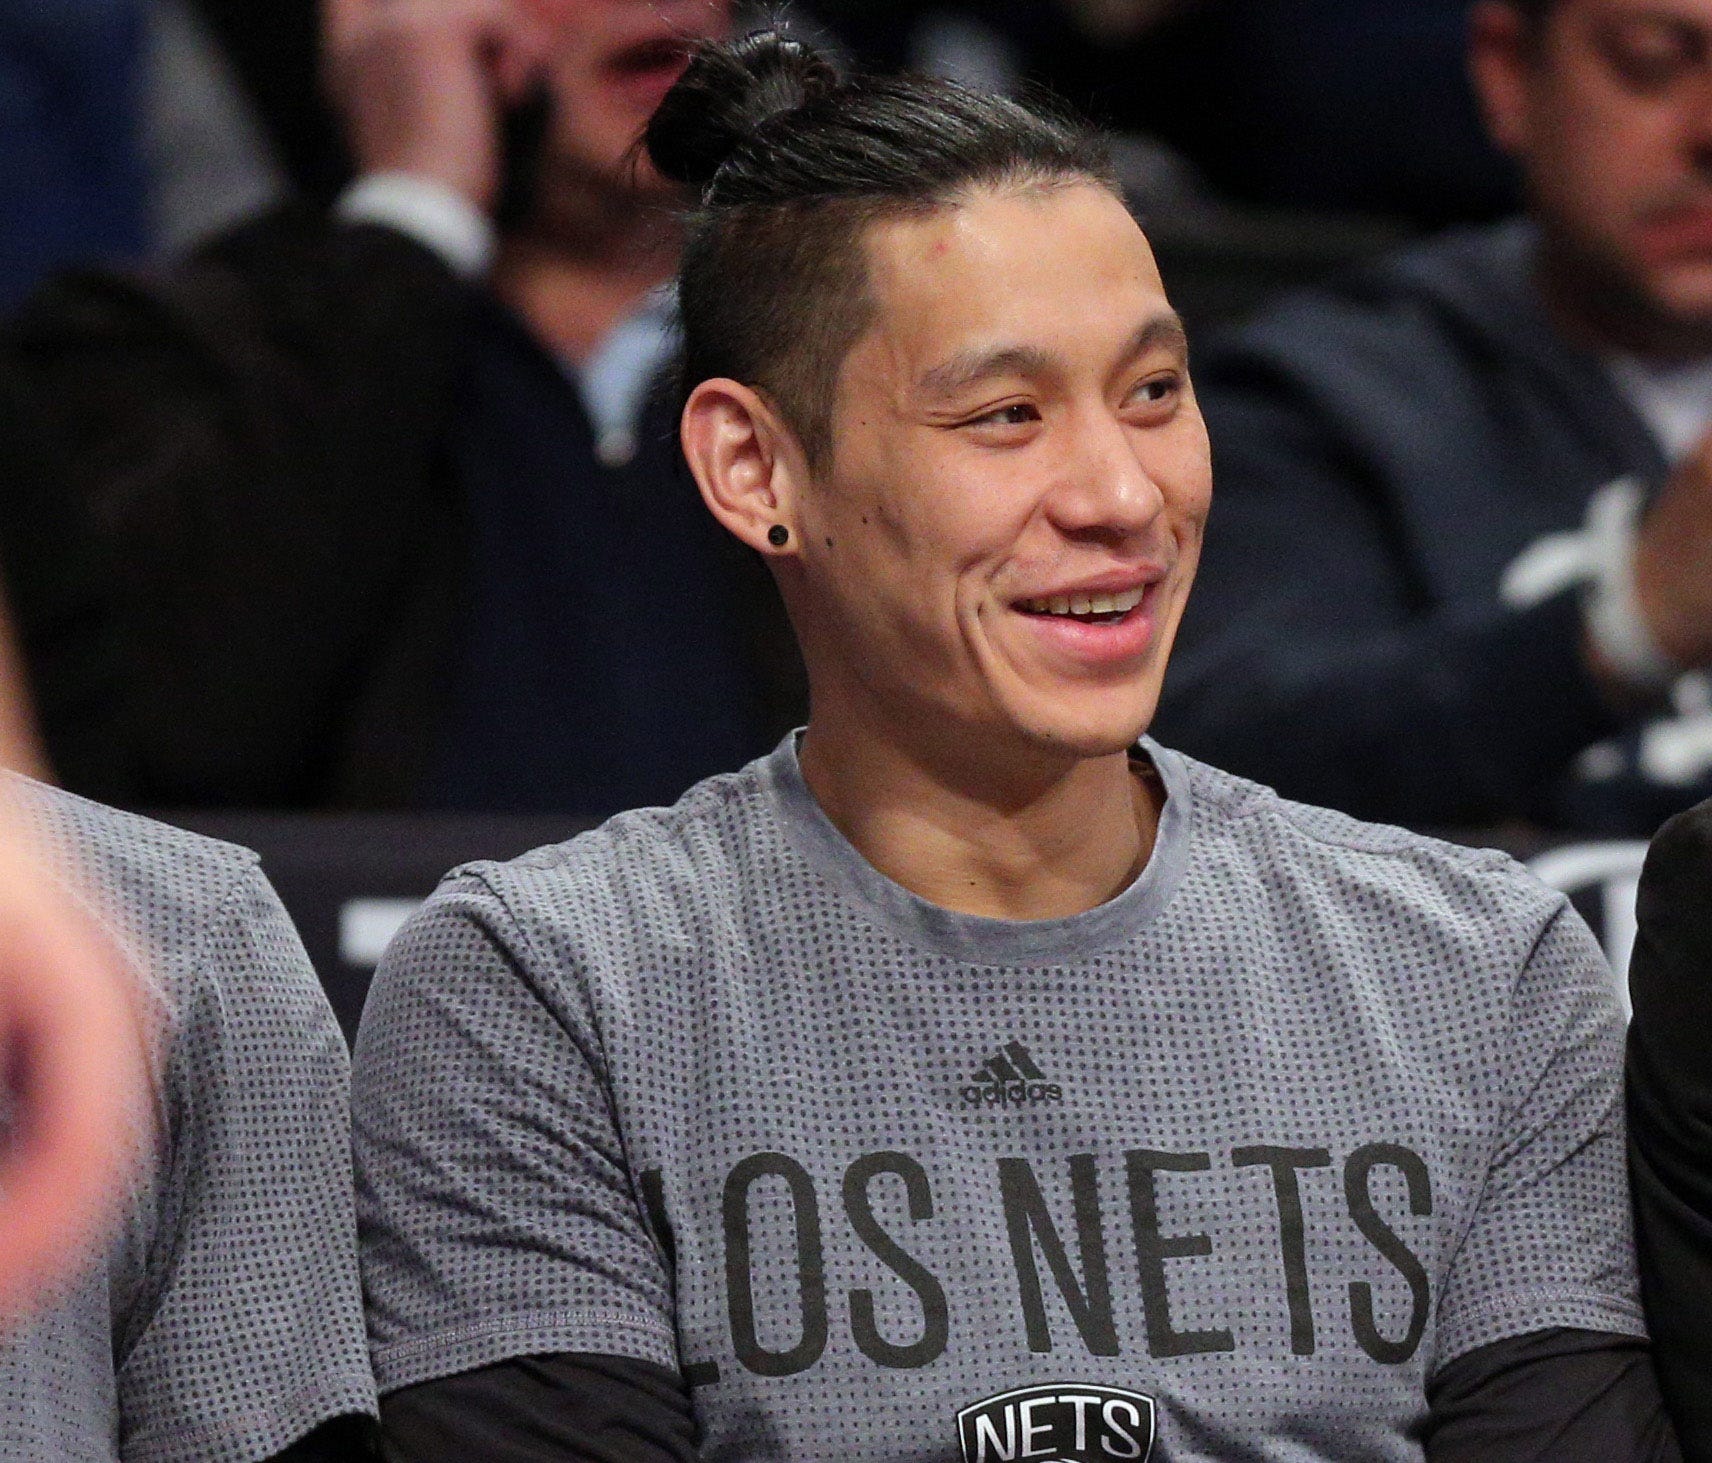 Brooklyn Nets injured point guard Jeremy Lin says the racist slurs hurled at him came more frequently when he played college ball at Harvard than it does now in the NBA.